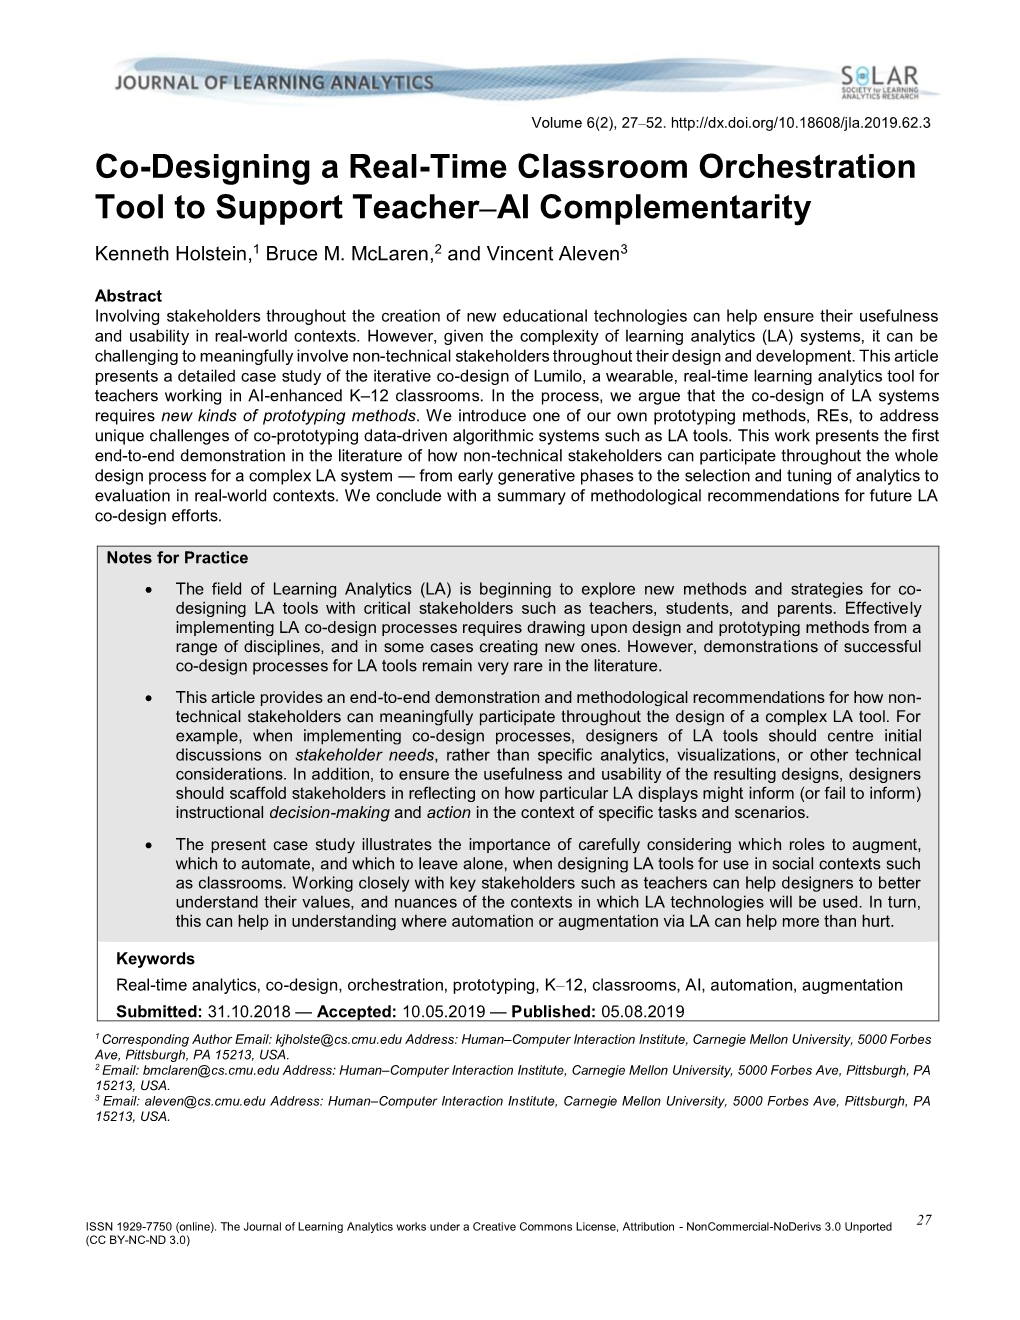 Co-Designing a Real-Time Classroom Orchestration Tool to Support Teacher–AI Complementarity Kenneth Holstein,1 Bruce M